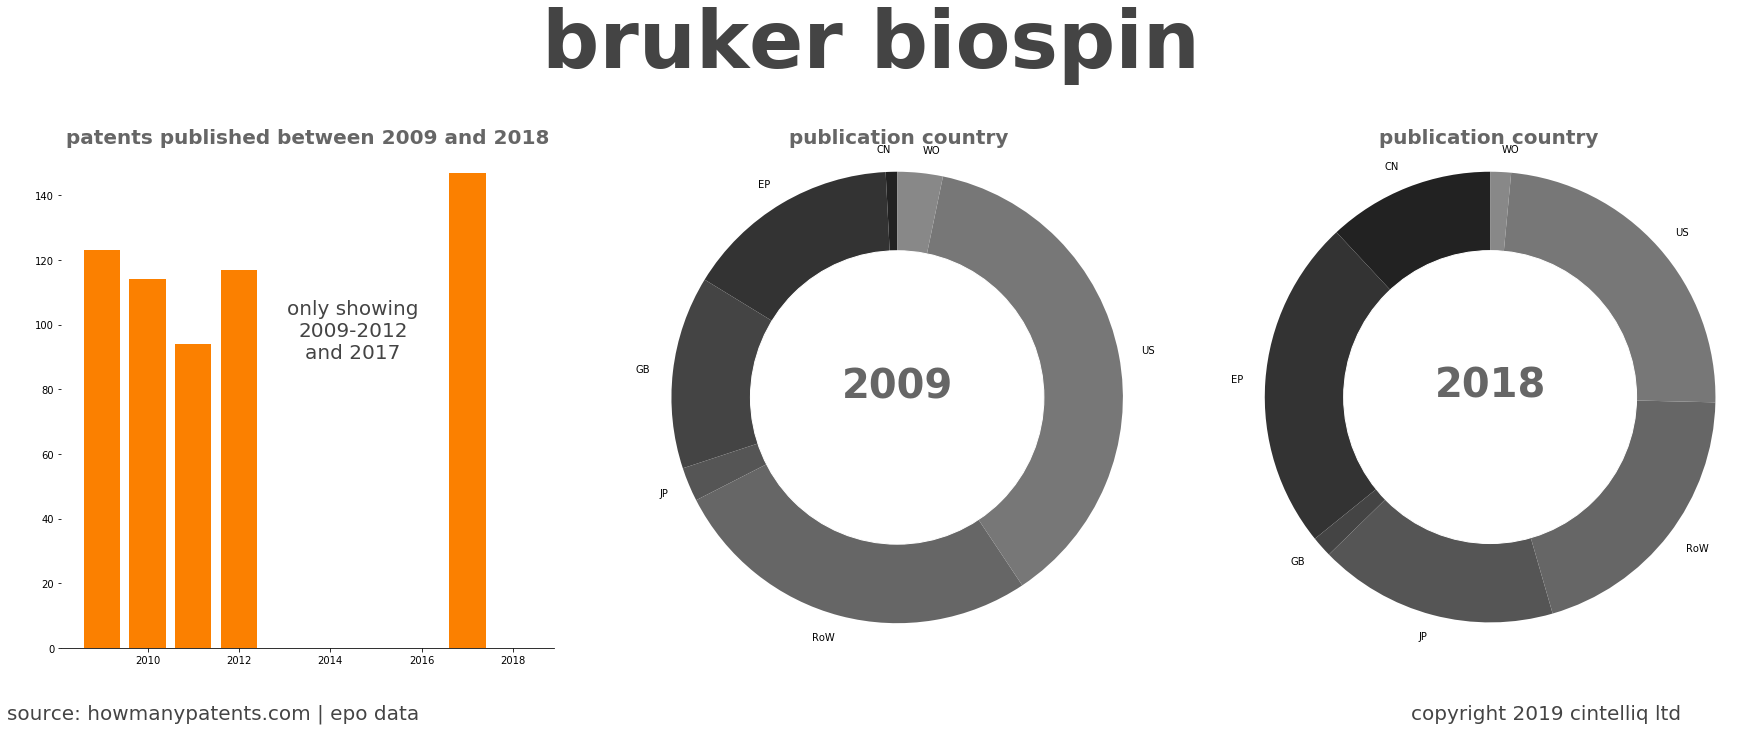 summary of patents for Bruker Biospin